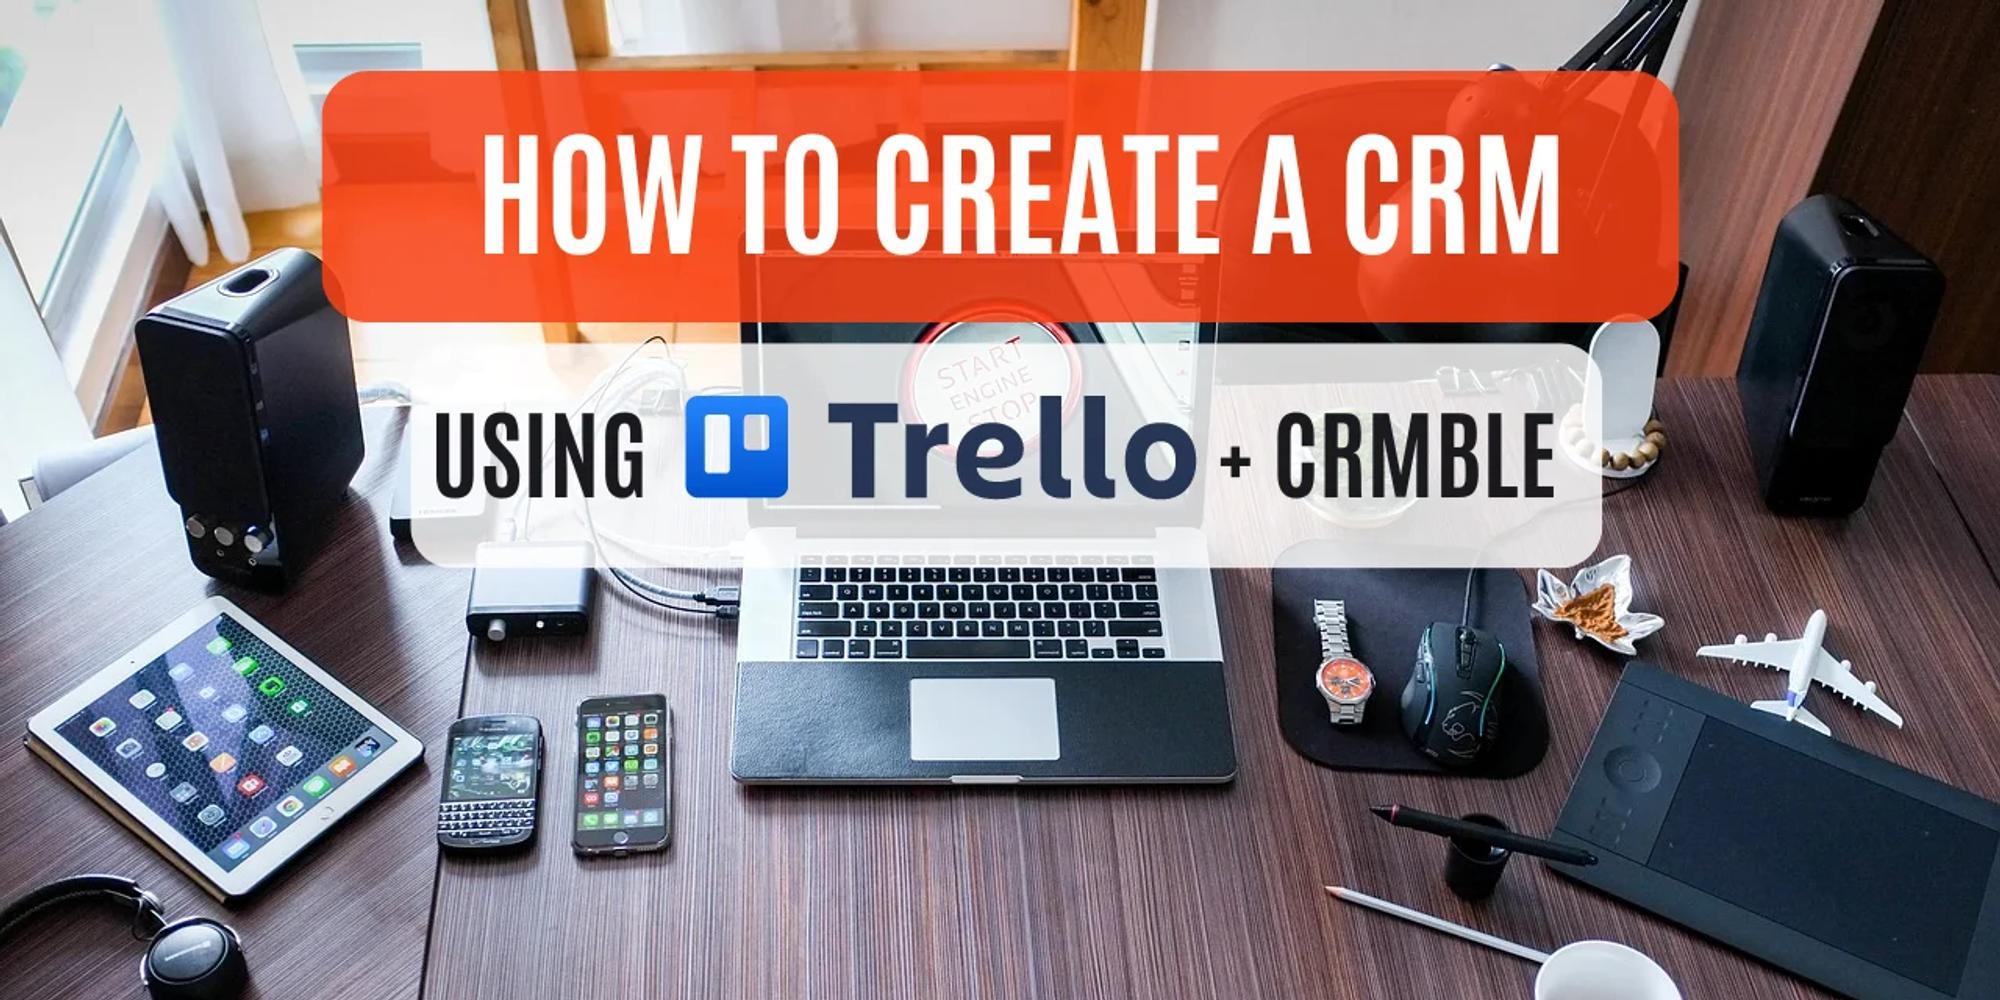 How To Use Crmble And Trello Together For A Powerful CRM Solution